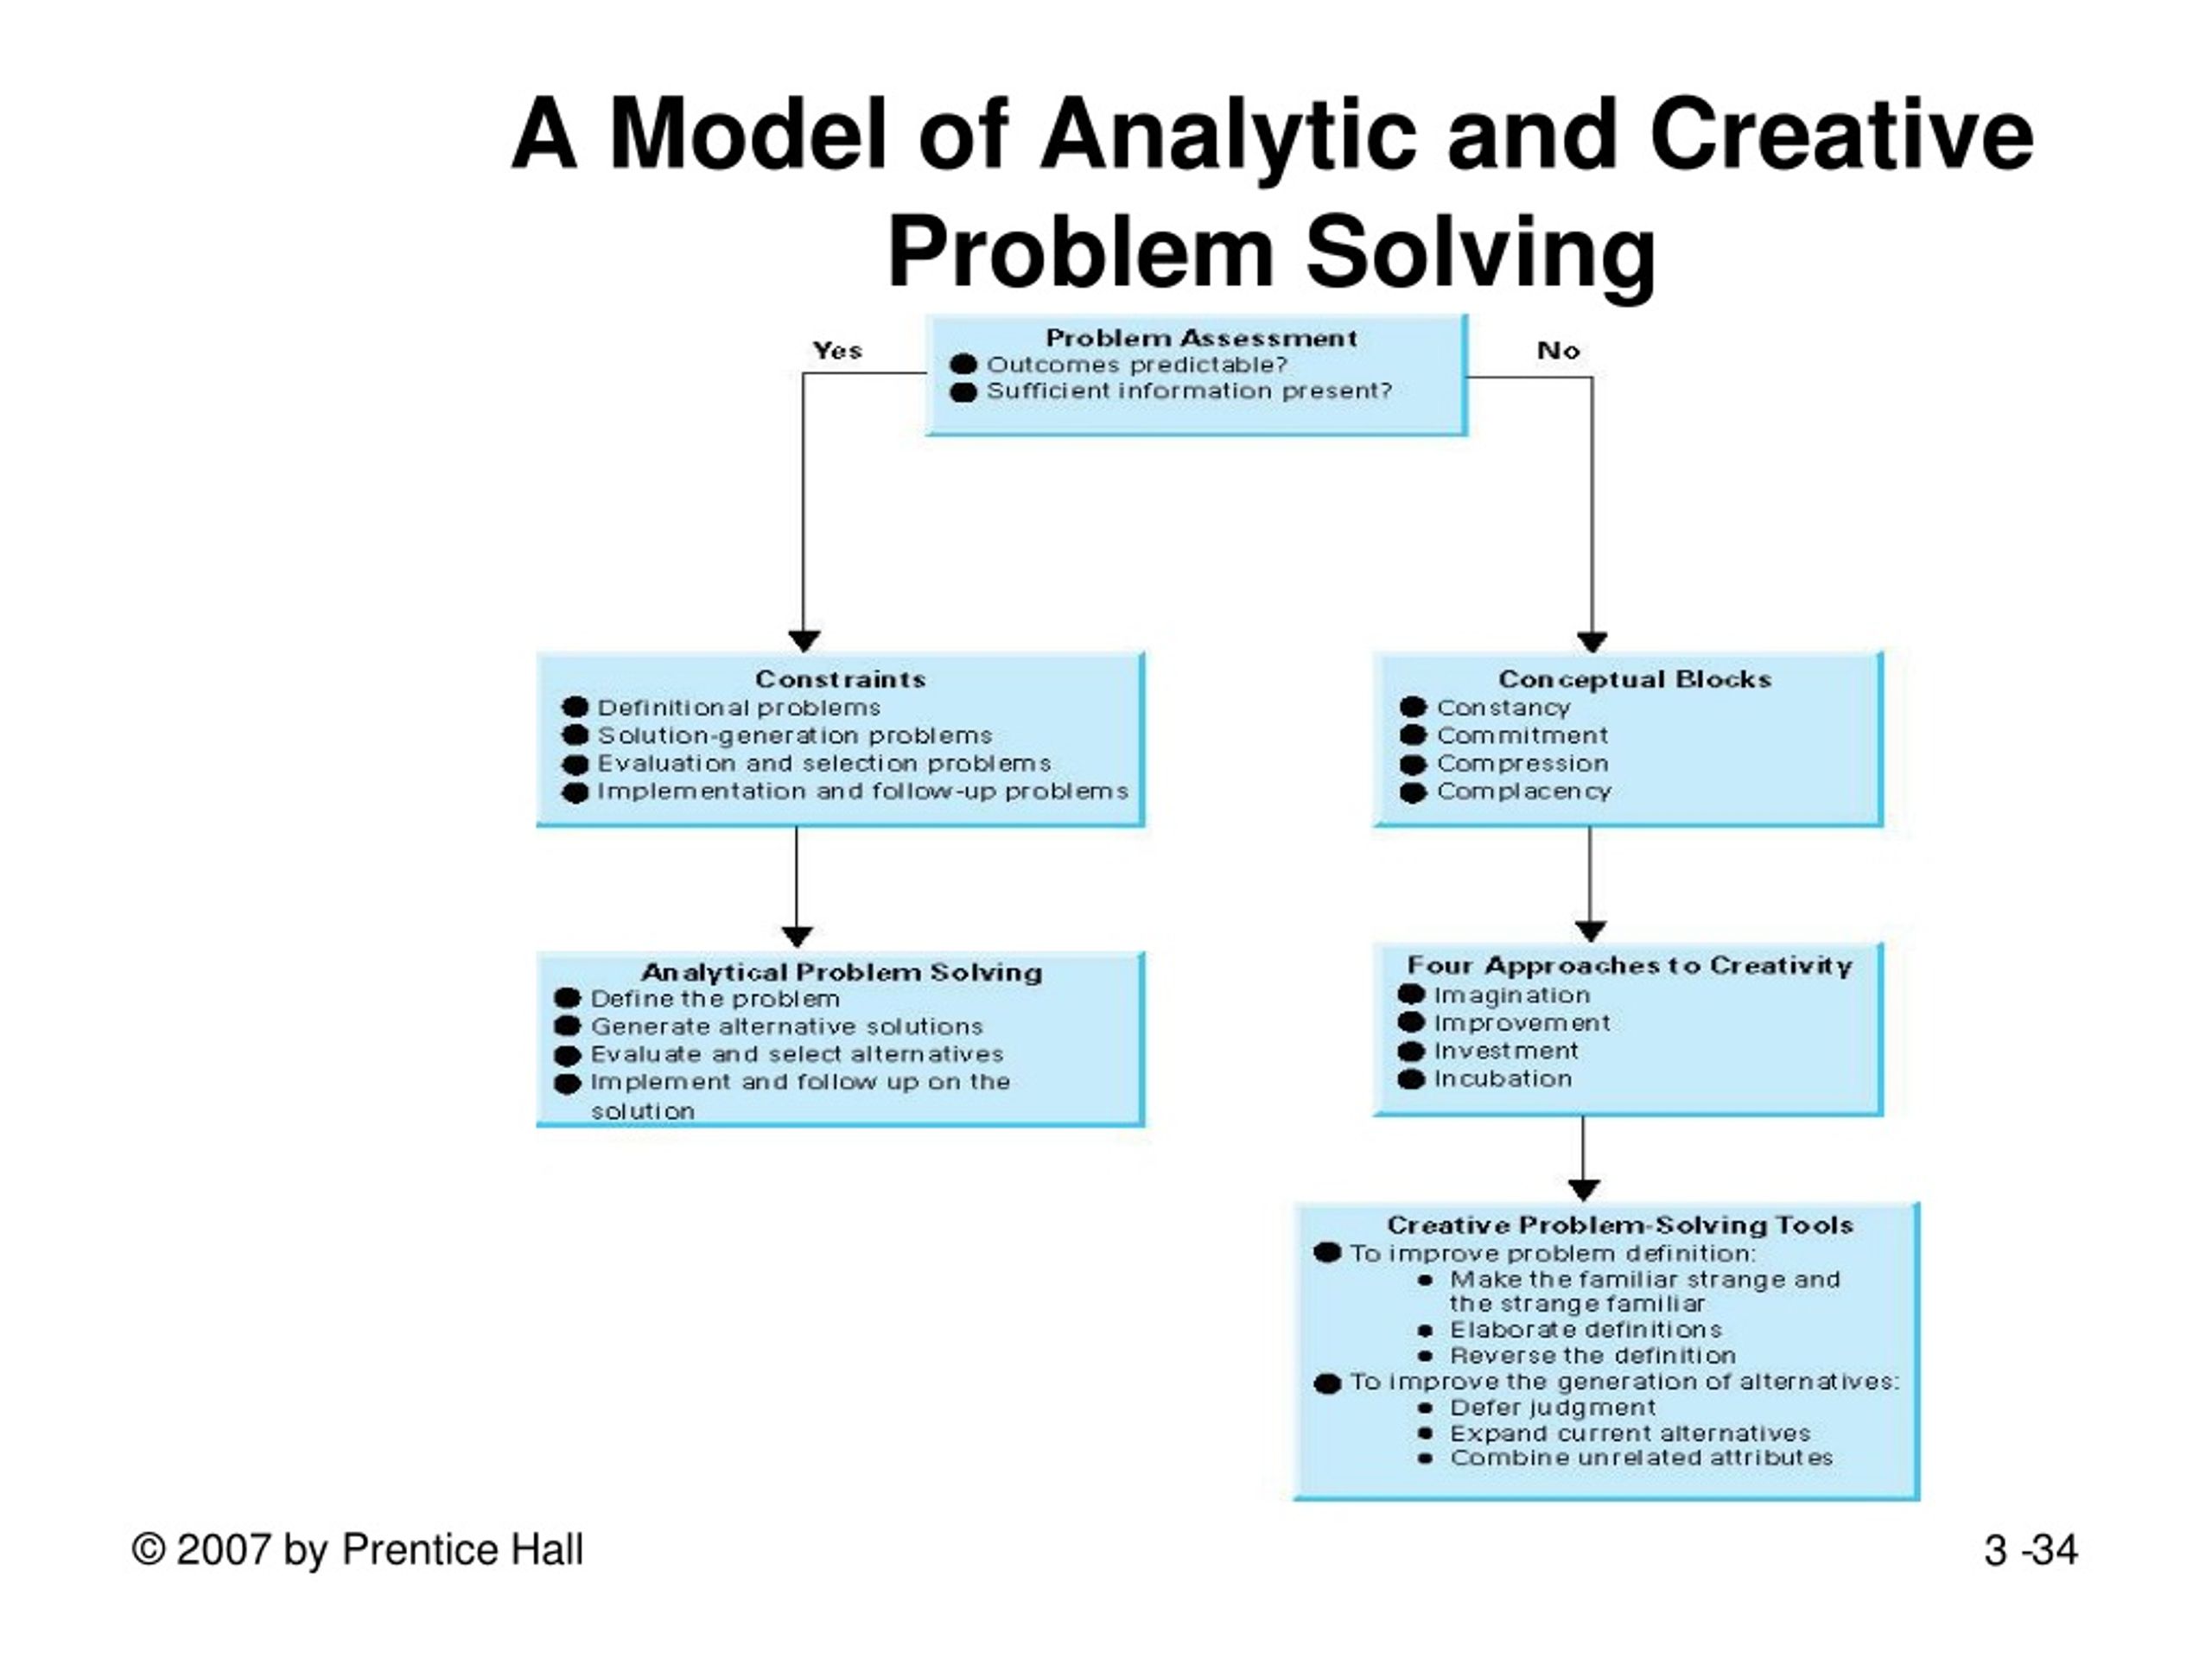 1. the analytical problem solving model helps minimize impediments to